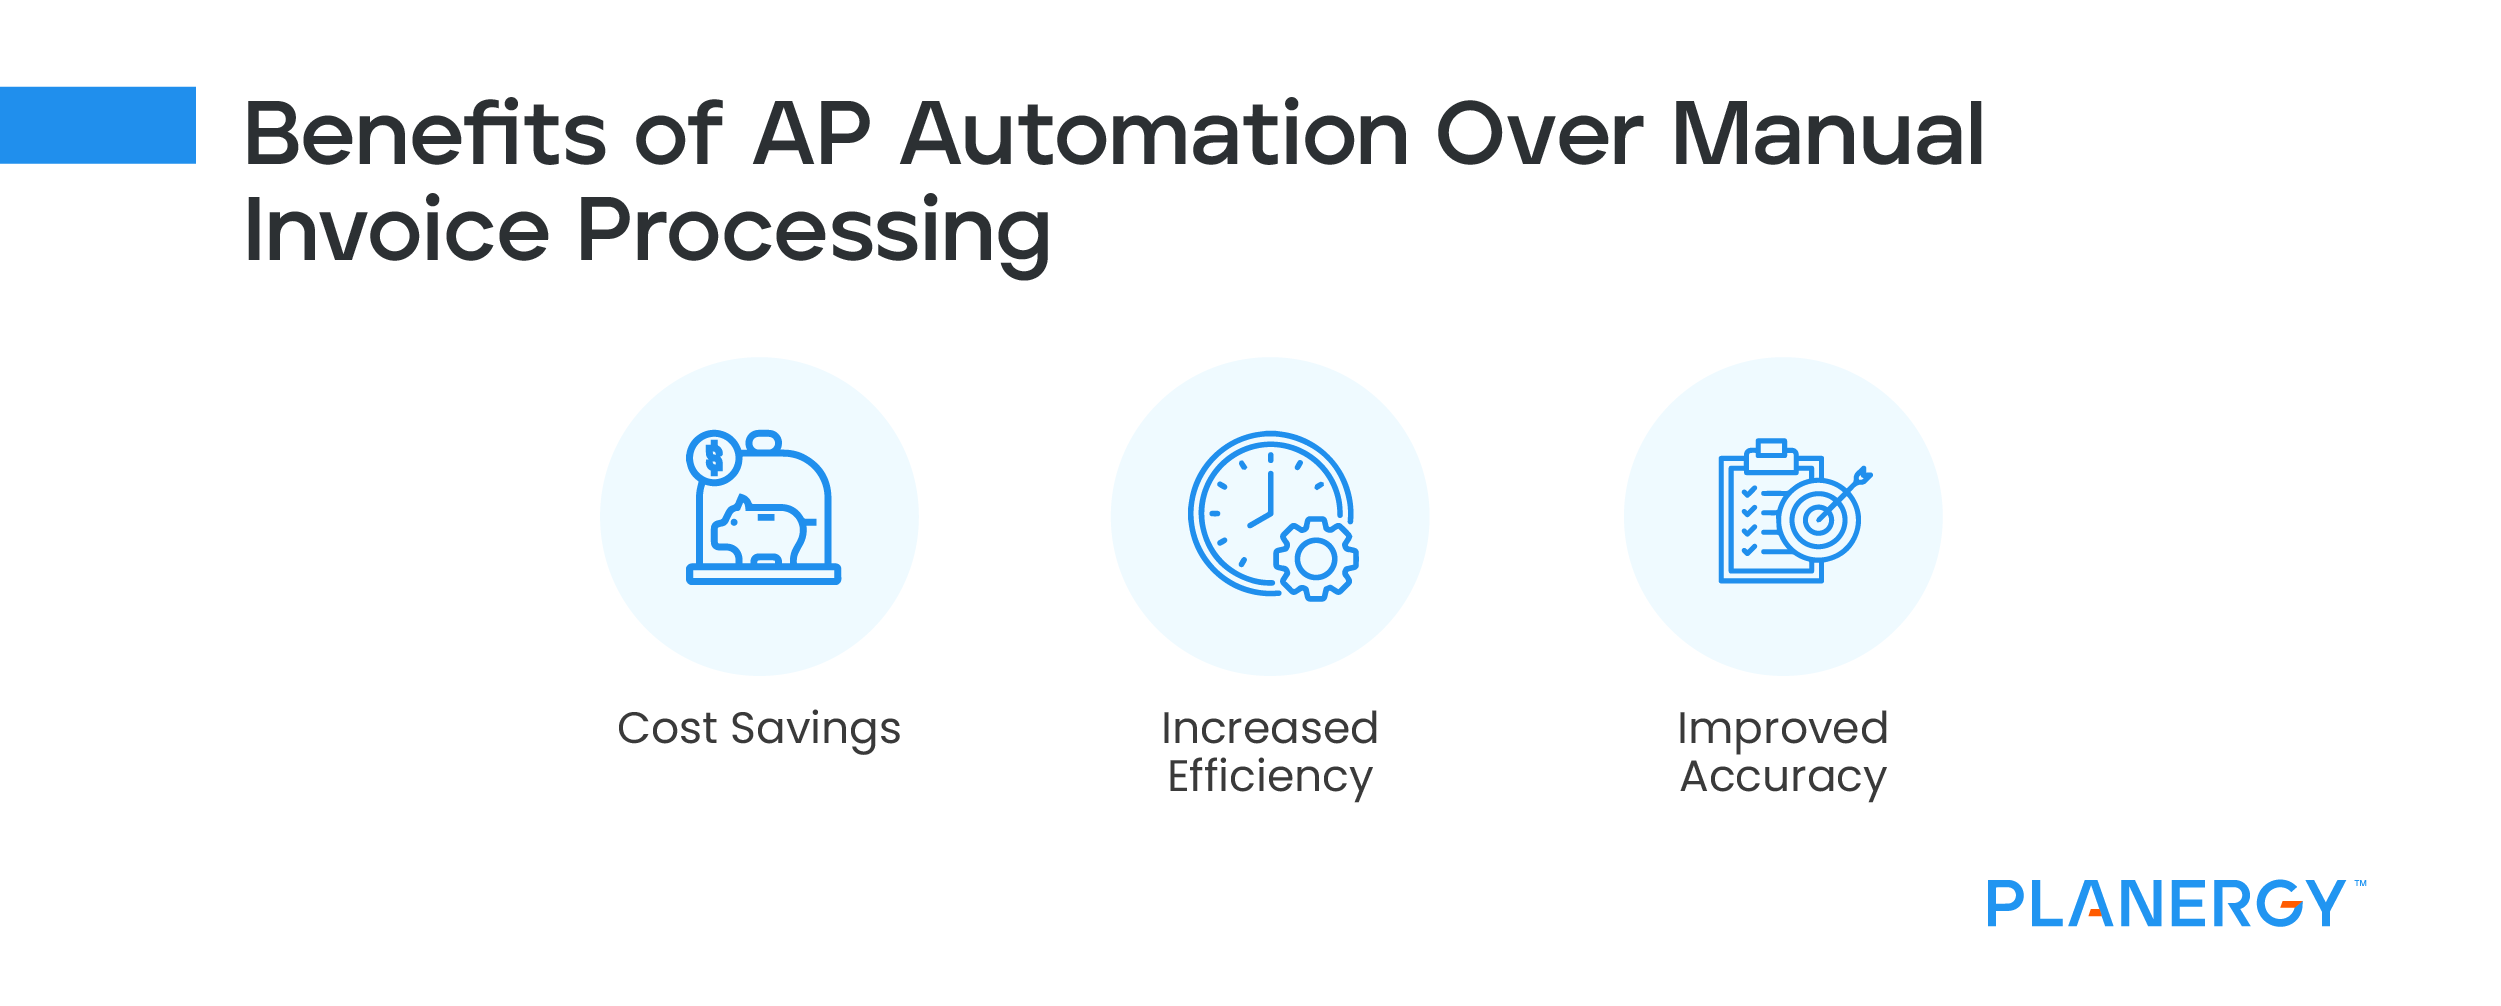 Benefits of AP Automation Over Manual Invoice Processing